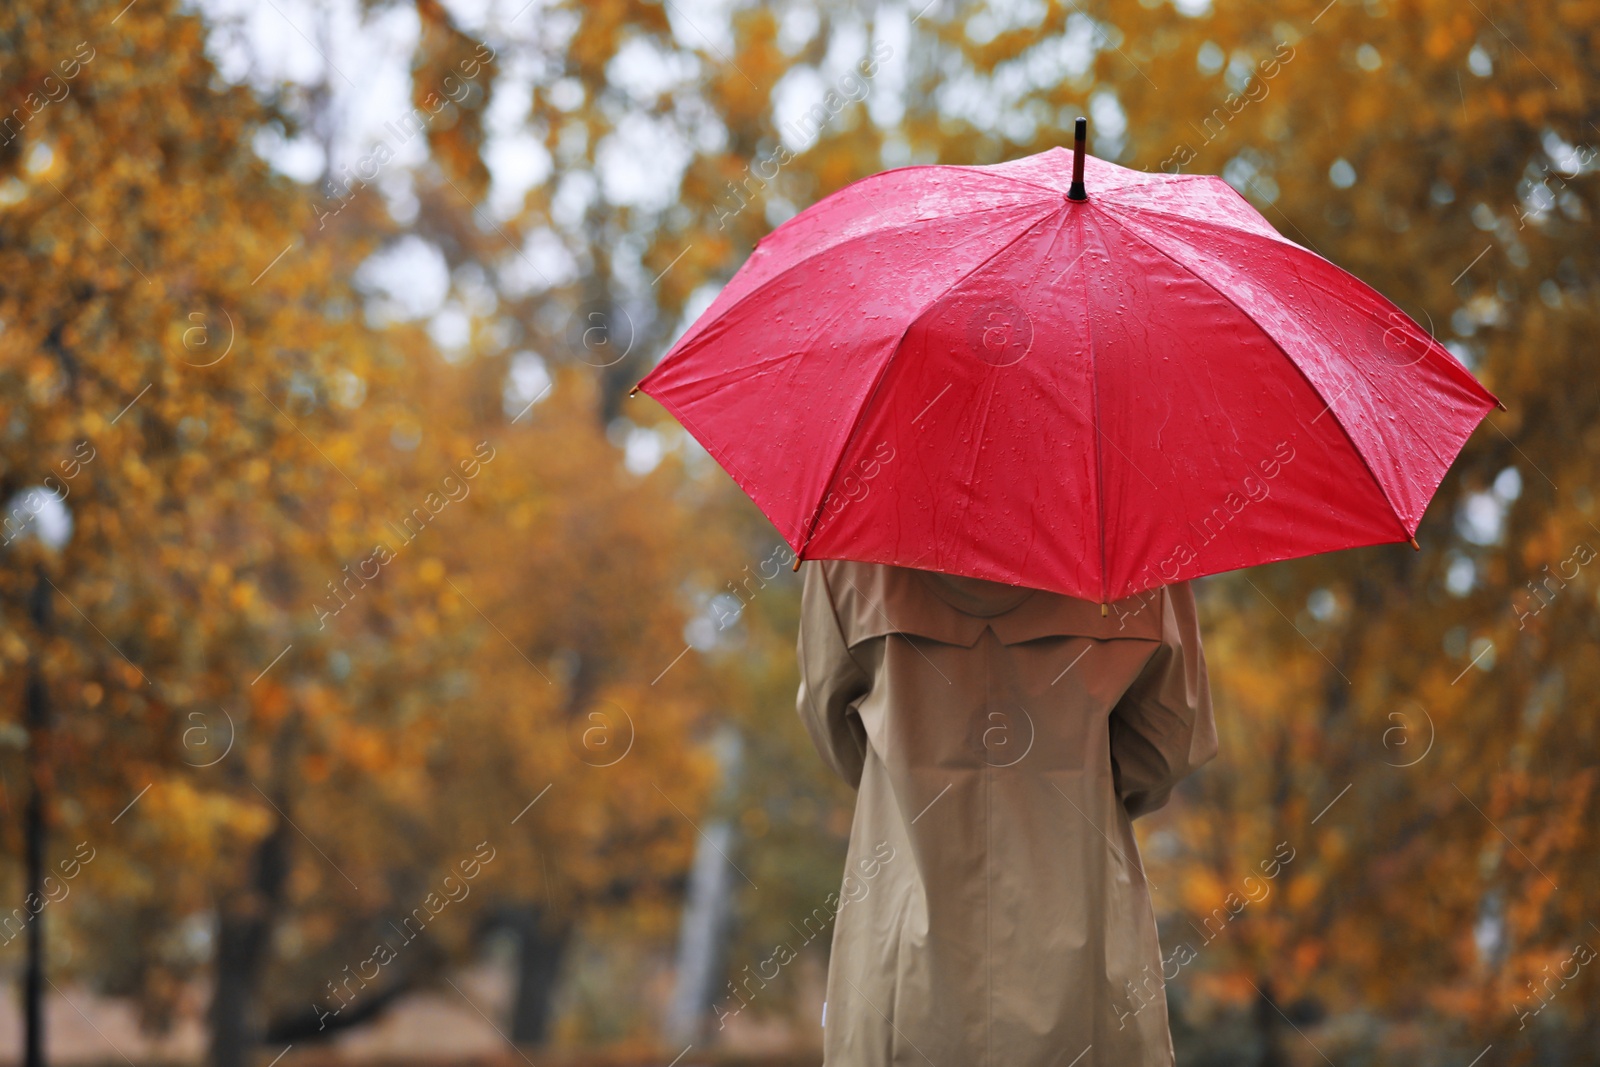 Photo of Woman with umbrella in autumn park on rainy day